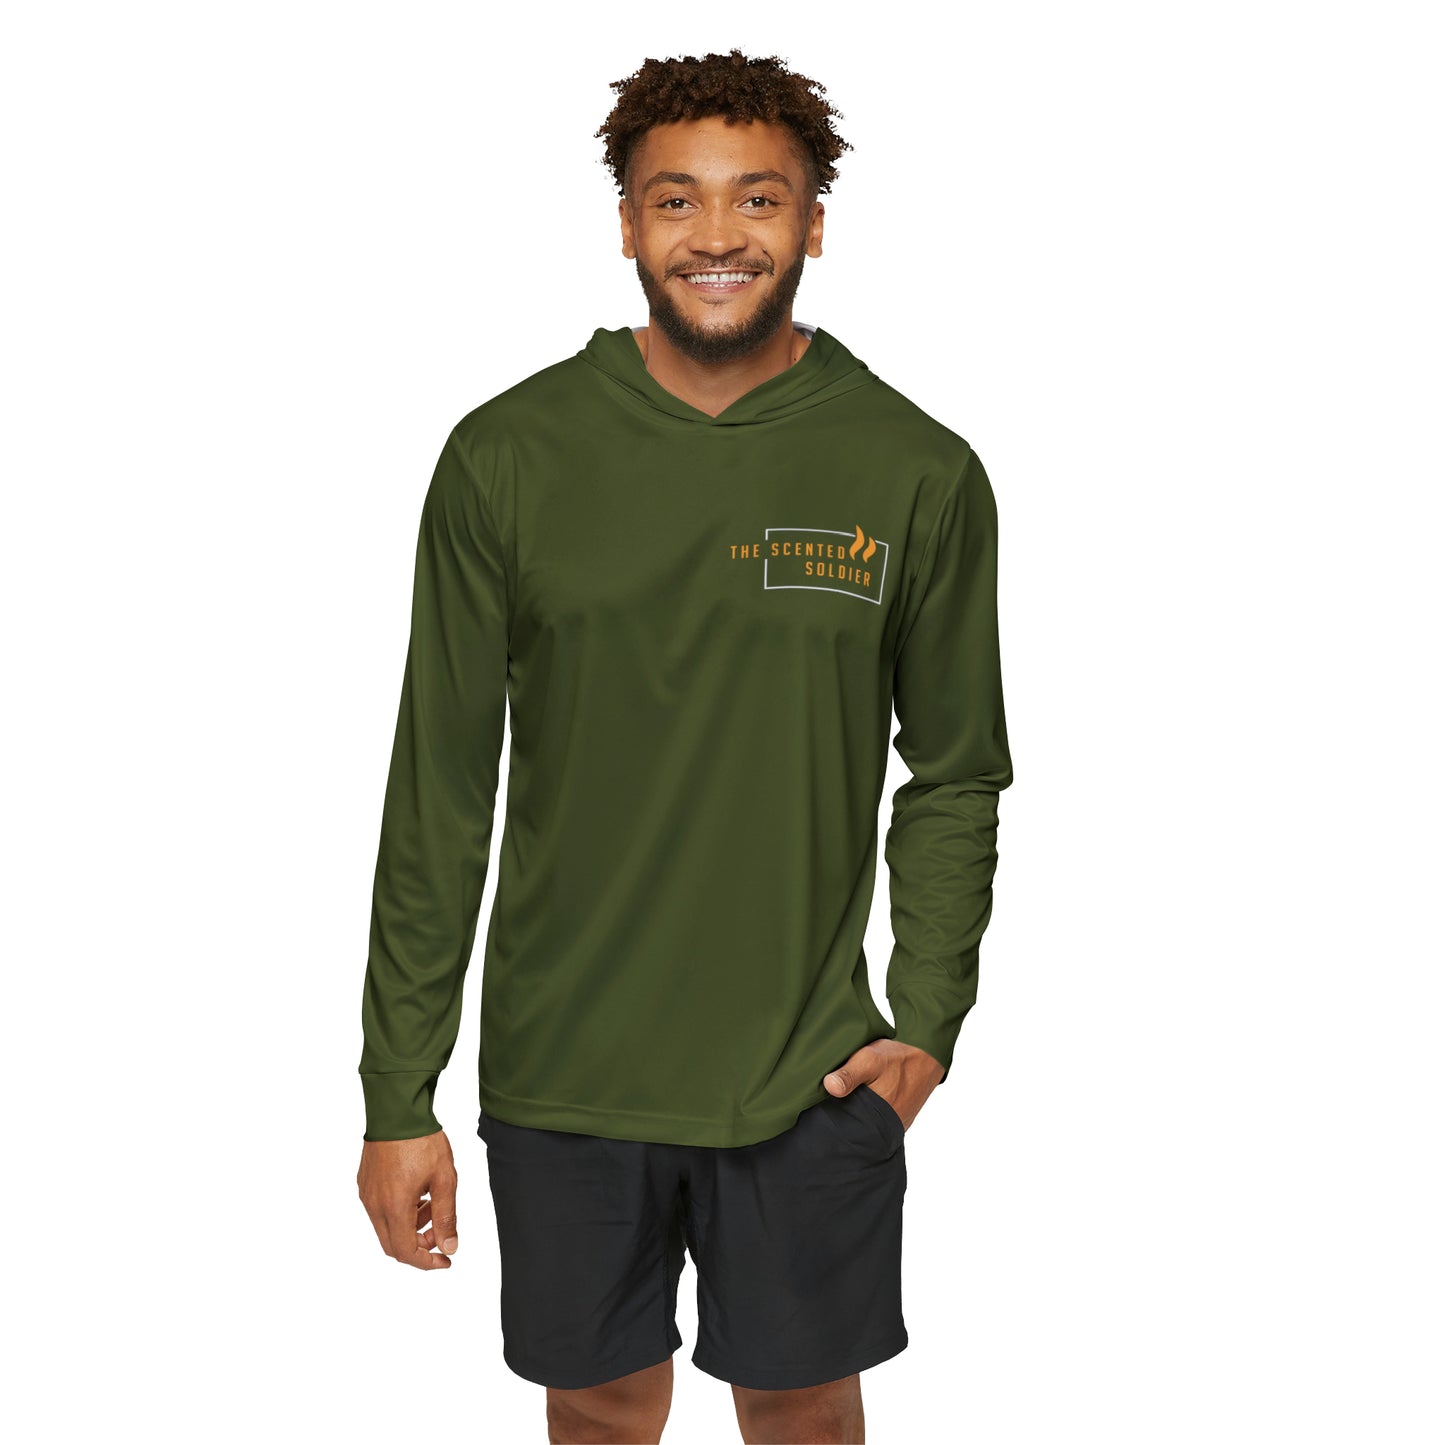 The Scented Soldier Sports Warmup Hoodie